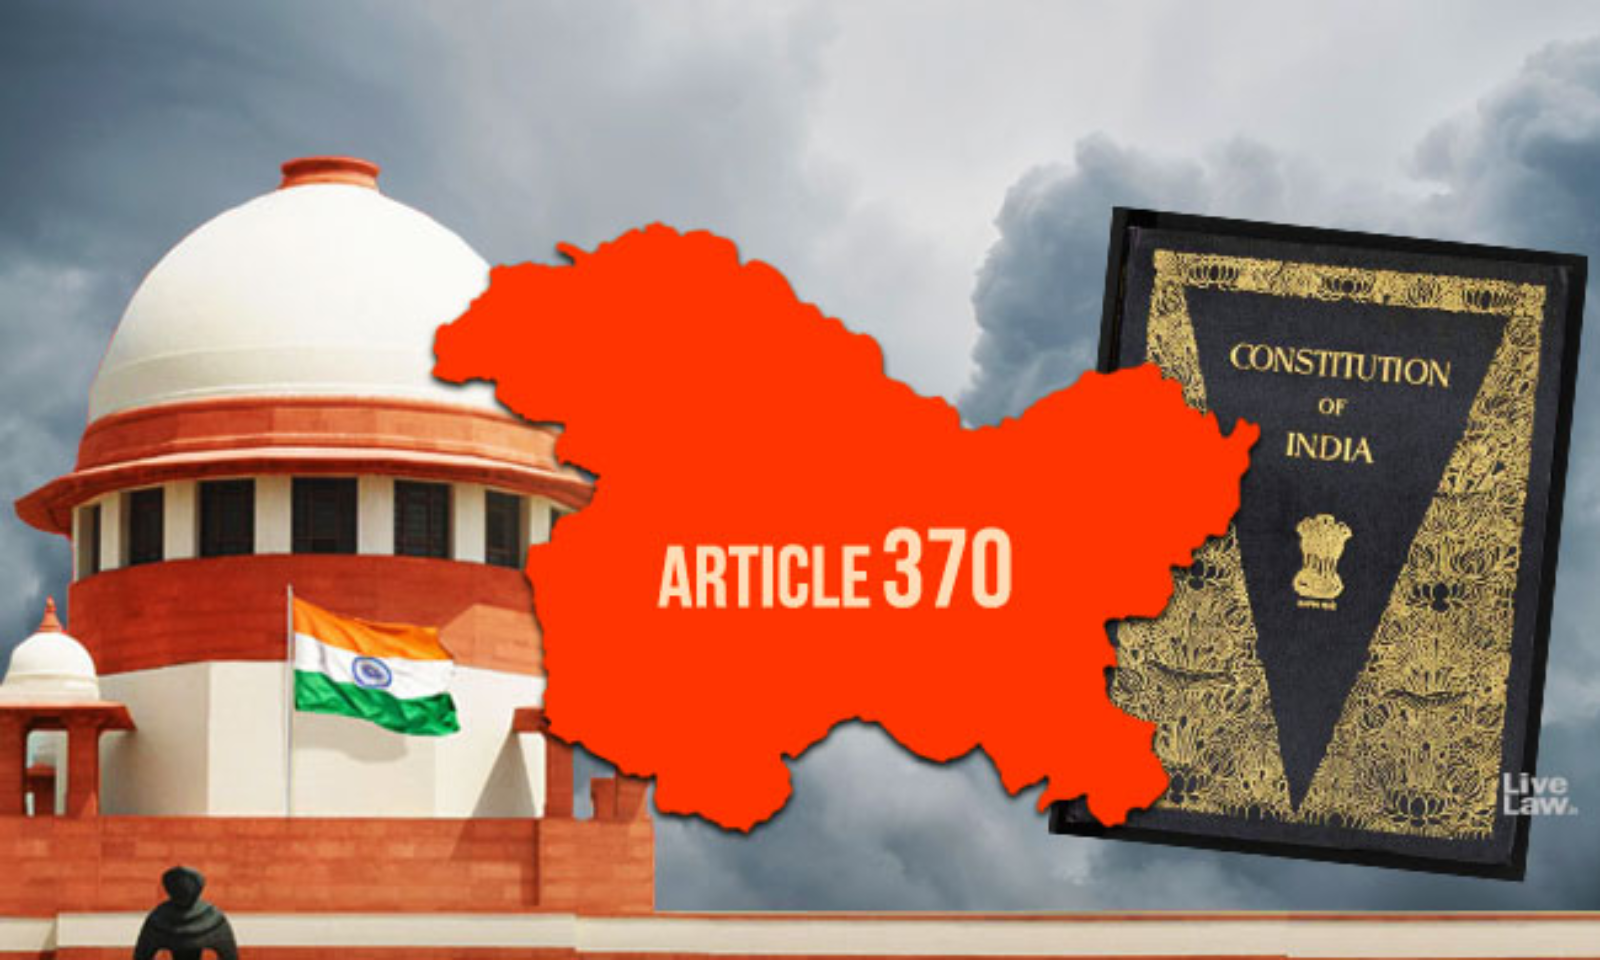 SC agrees to early listing of pleas on Article 370